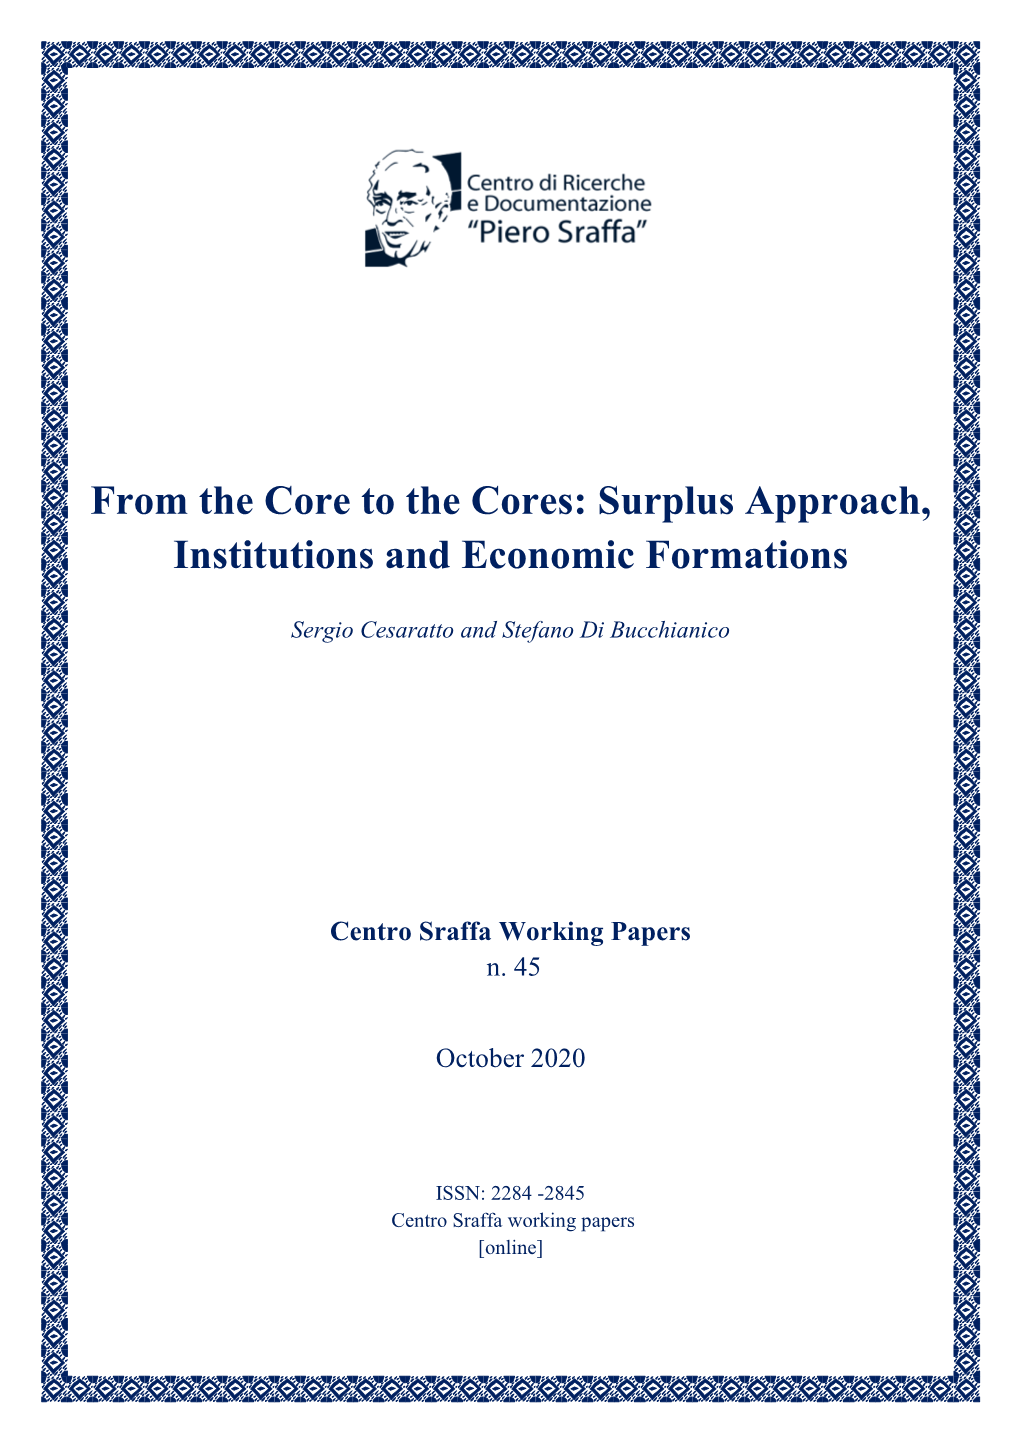 Surplus Approach, Institutions and Economic Formations